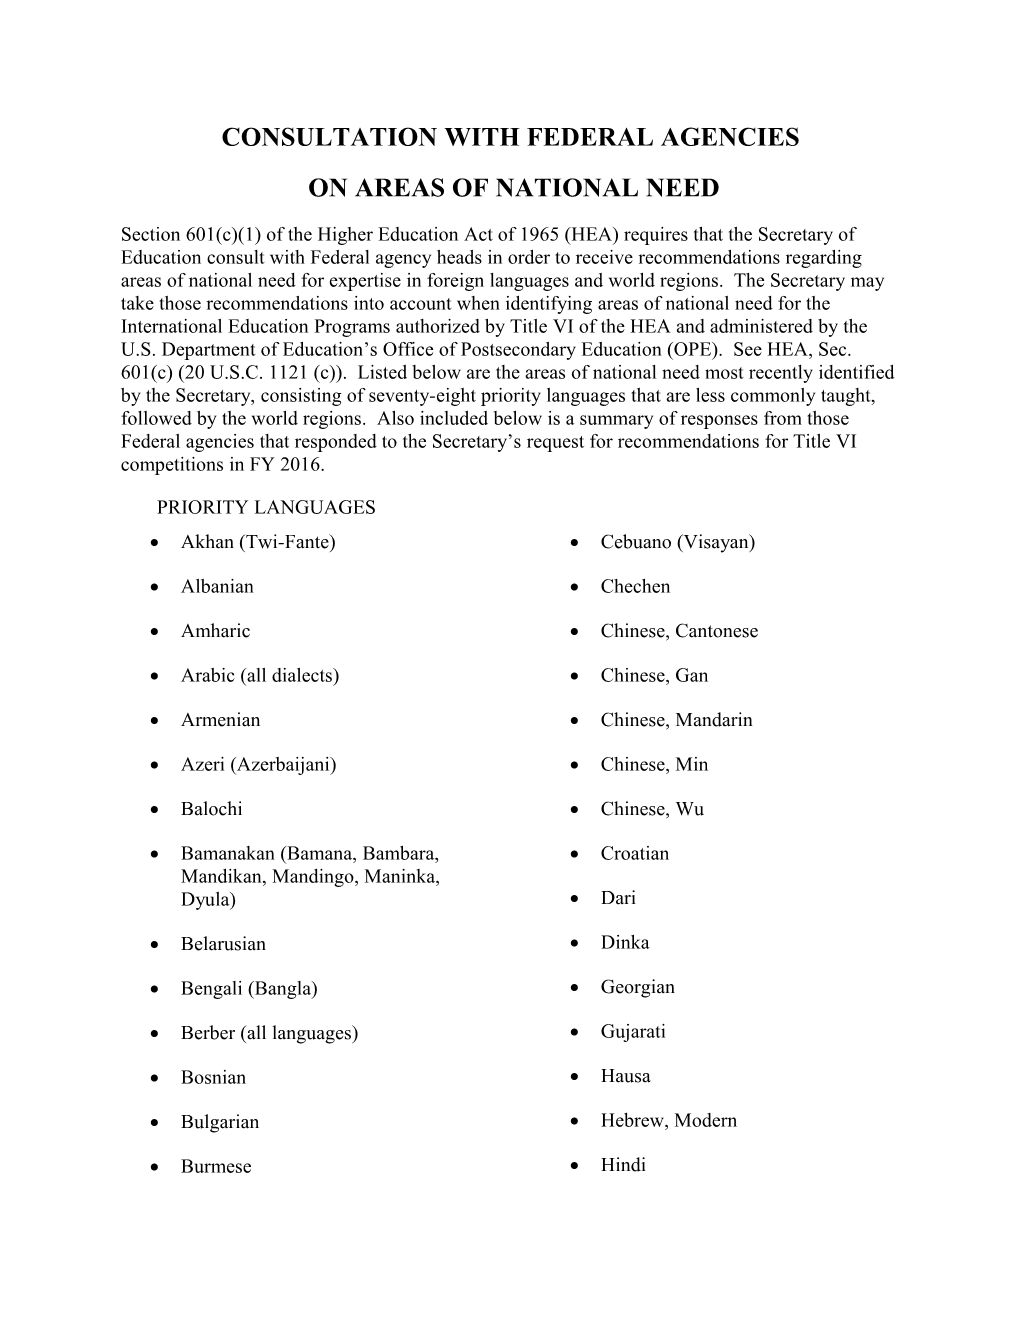 Consultation with Federal Agencies on Areas of National Need - 2016 (MS Word)